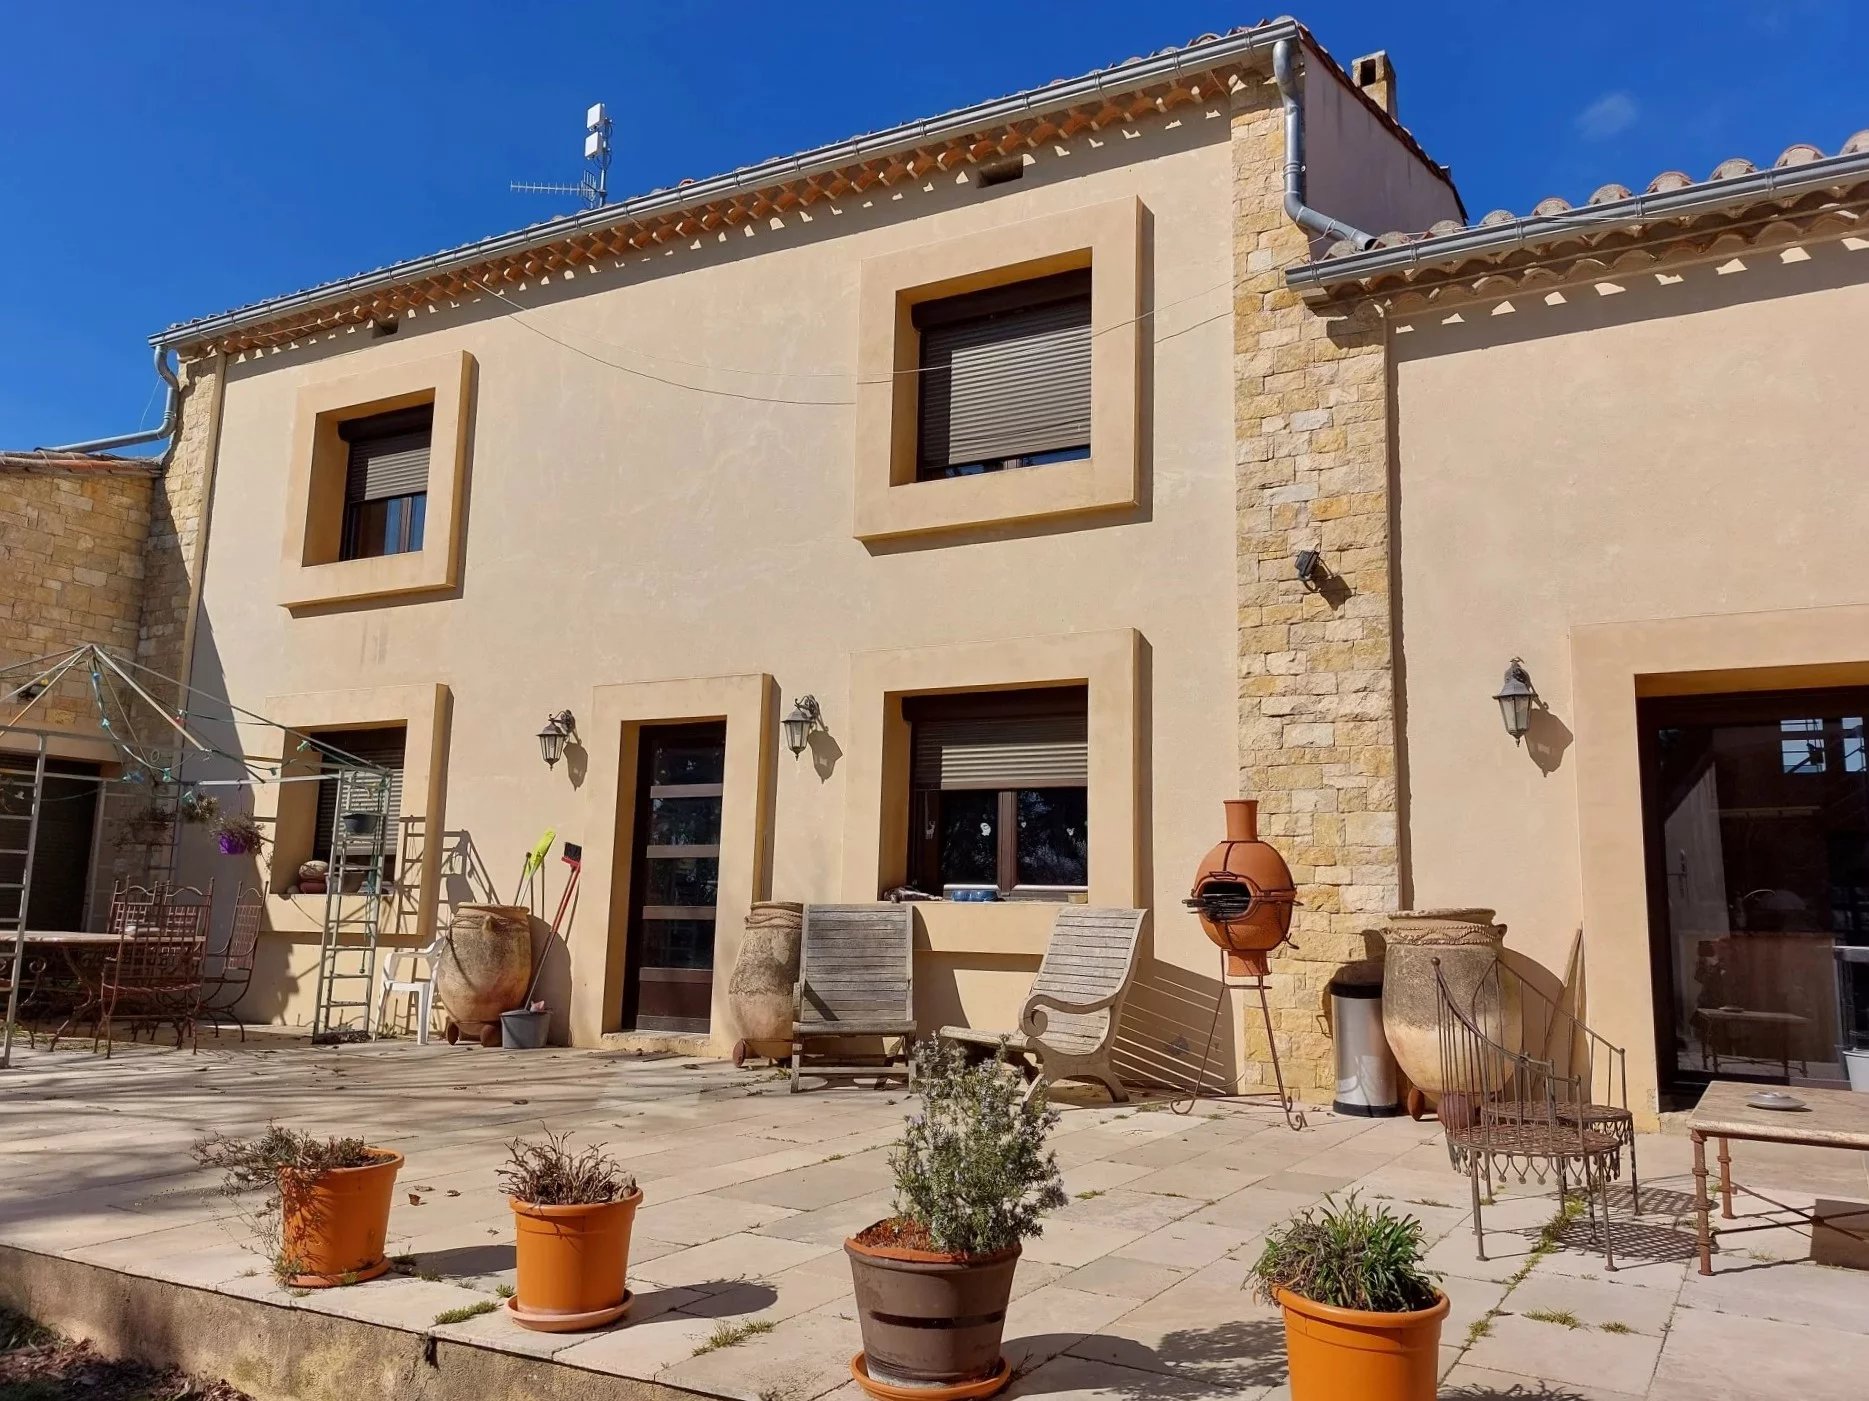 42 hectares, main house, gite, office and workshop, close to Carcassonne and Limoux